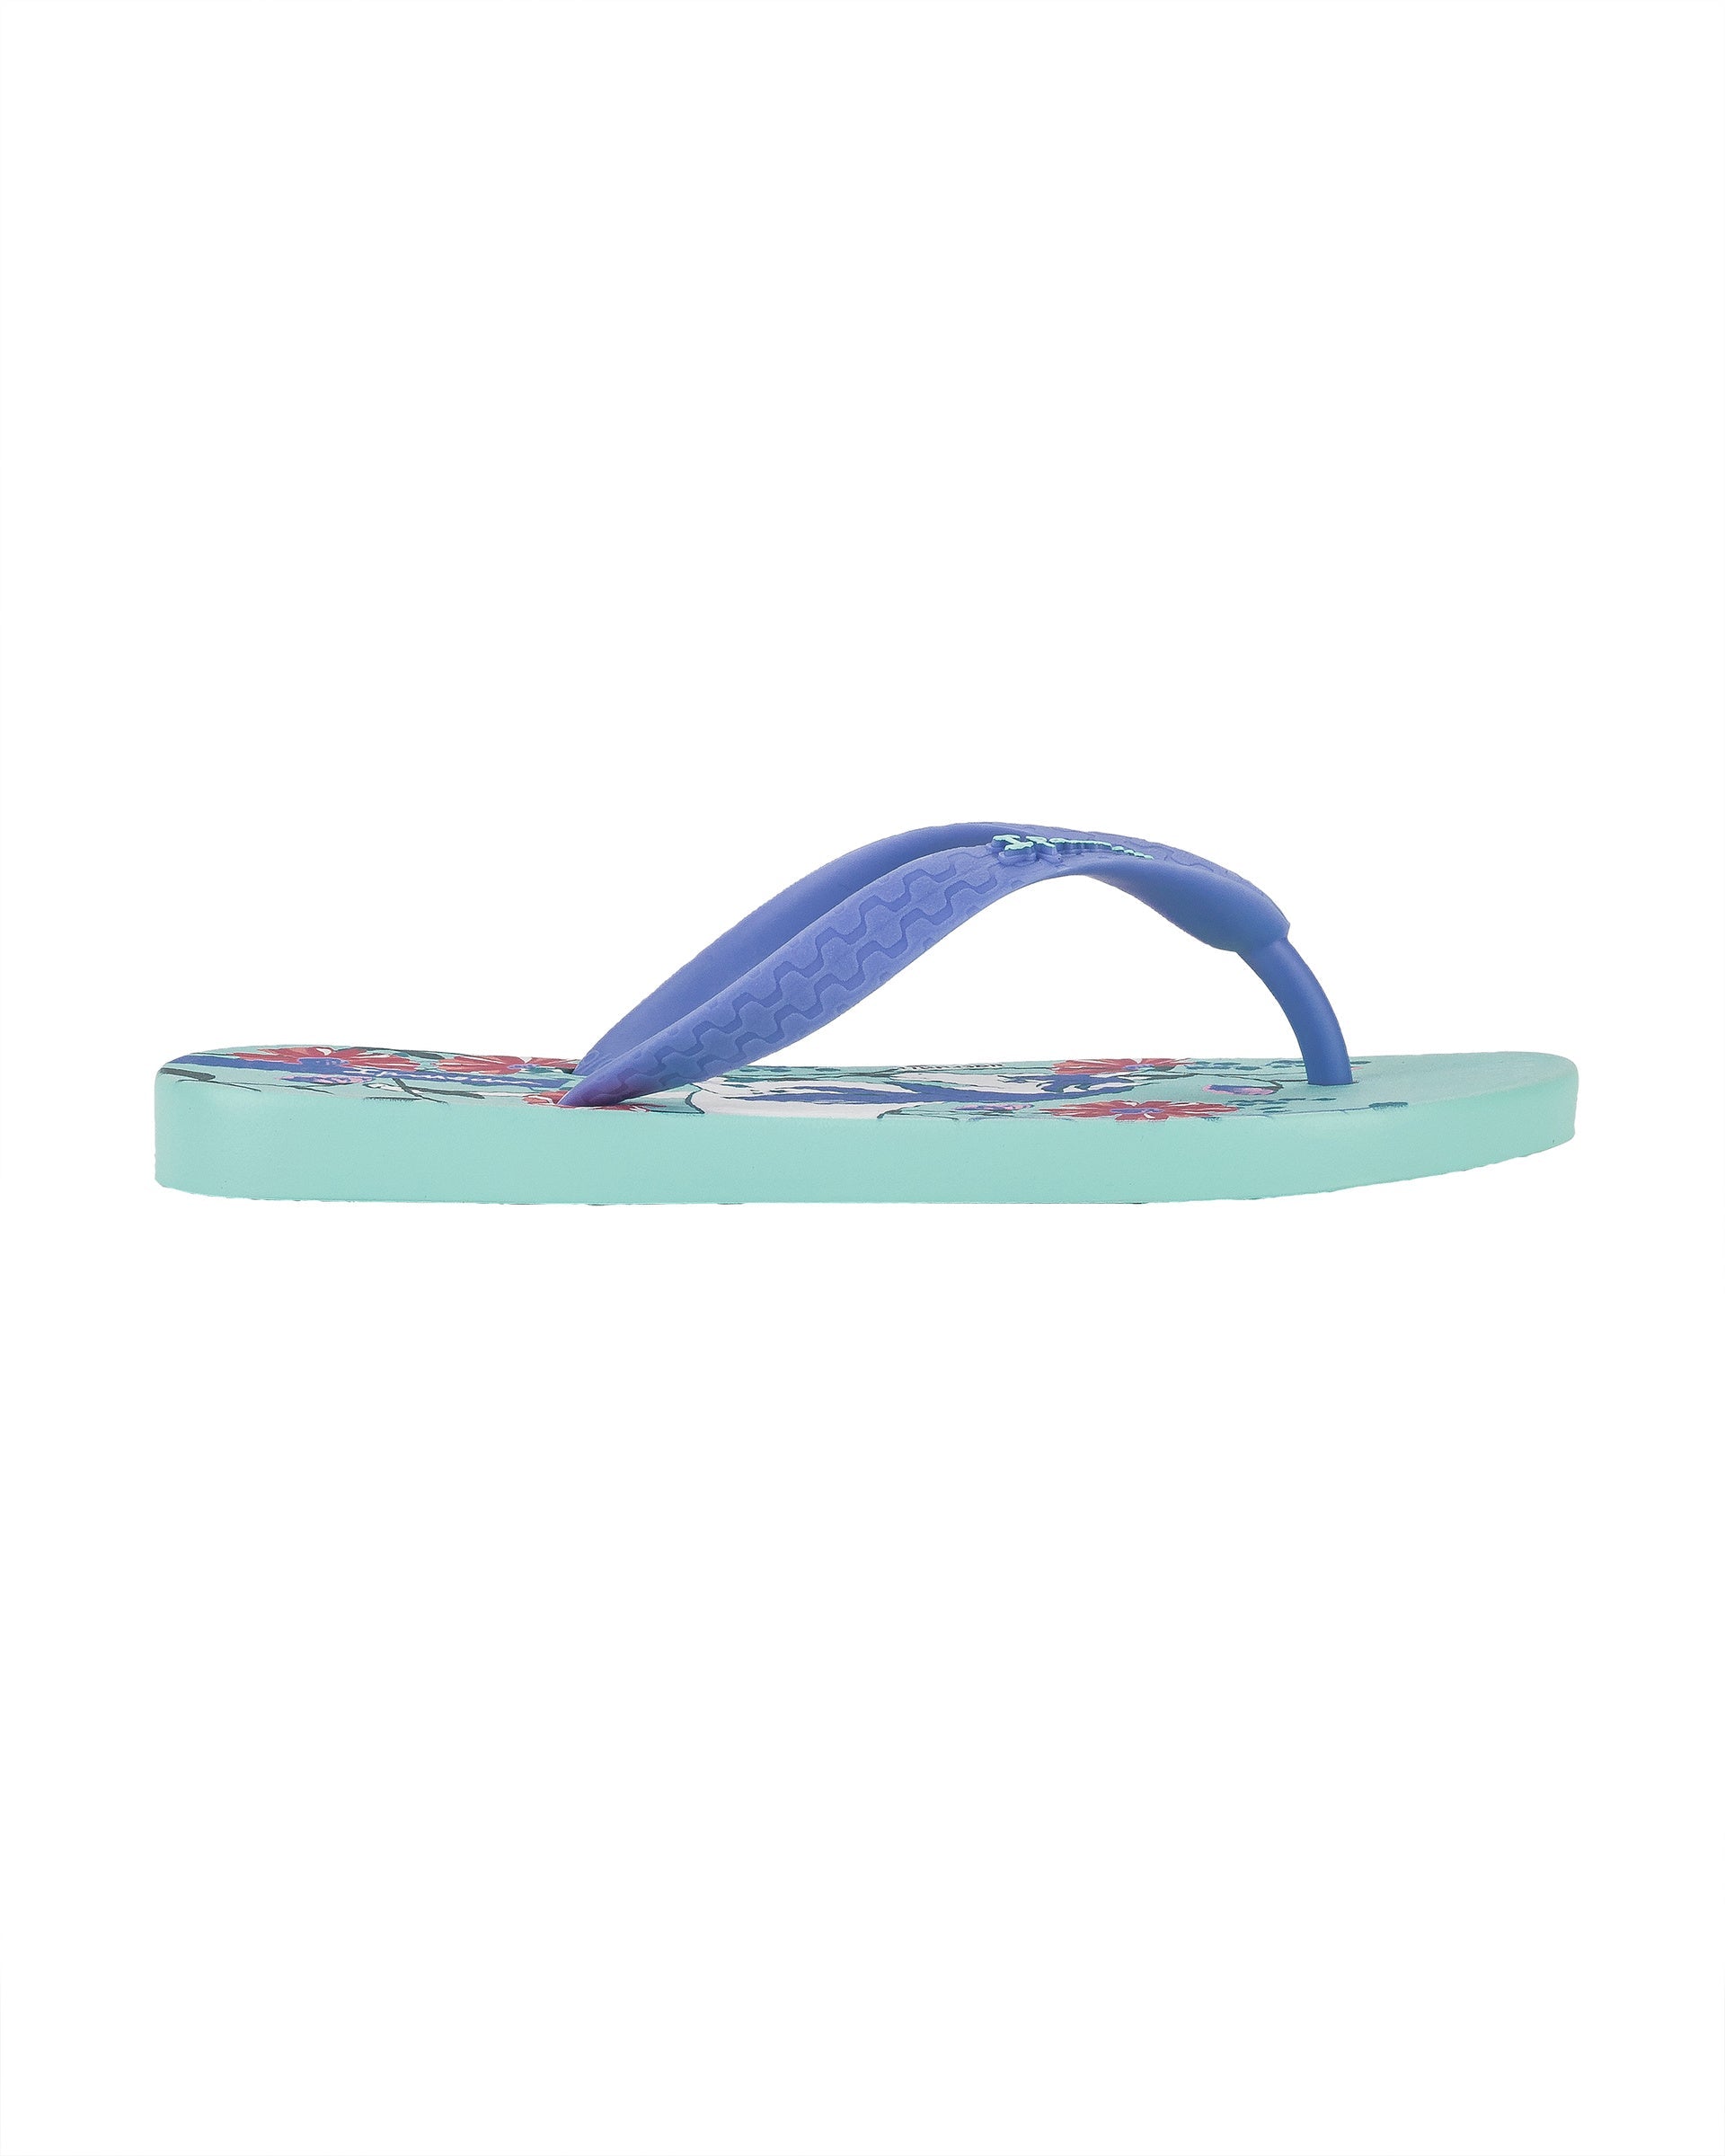 Outer side view of a blue Ipanema Temas kids flip flop with unicorn and flower print.